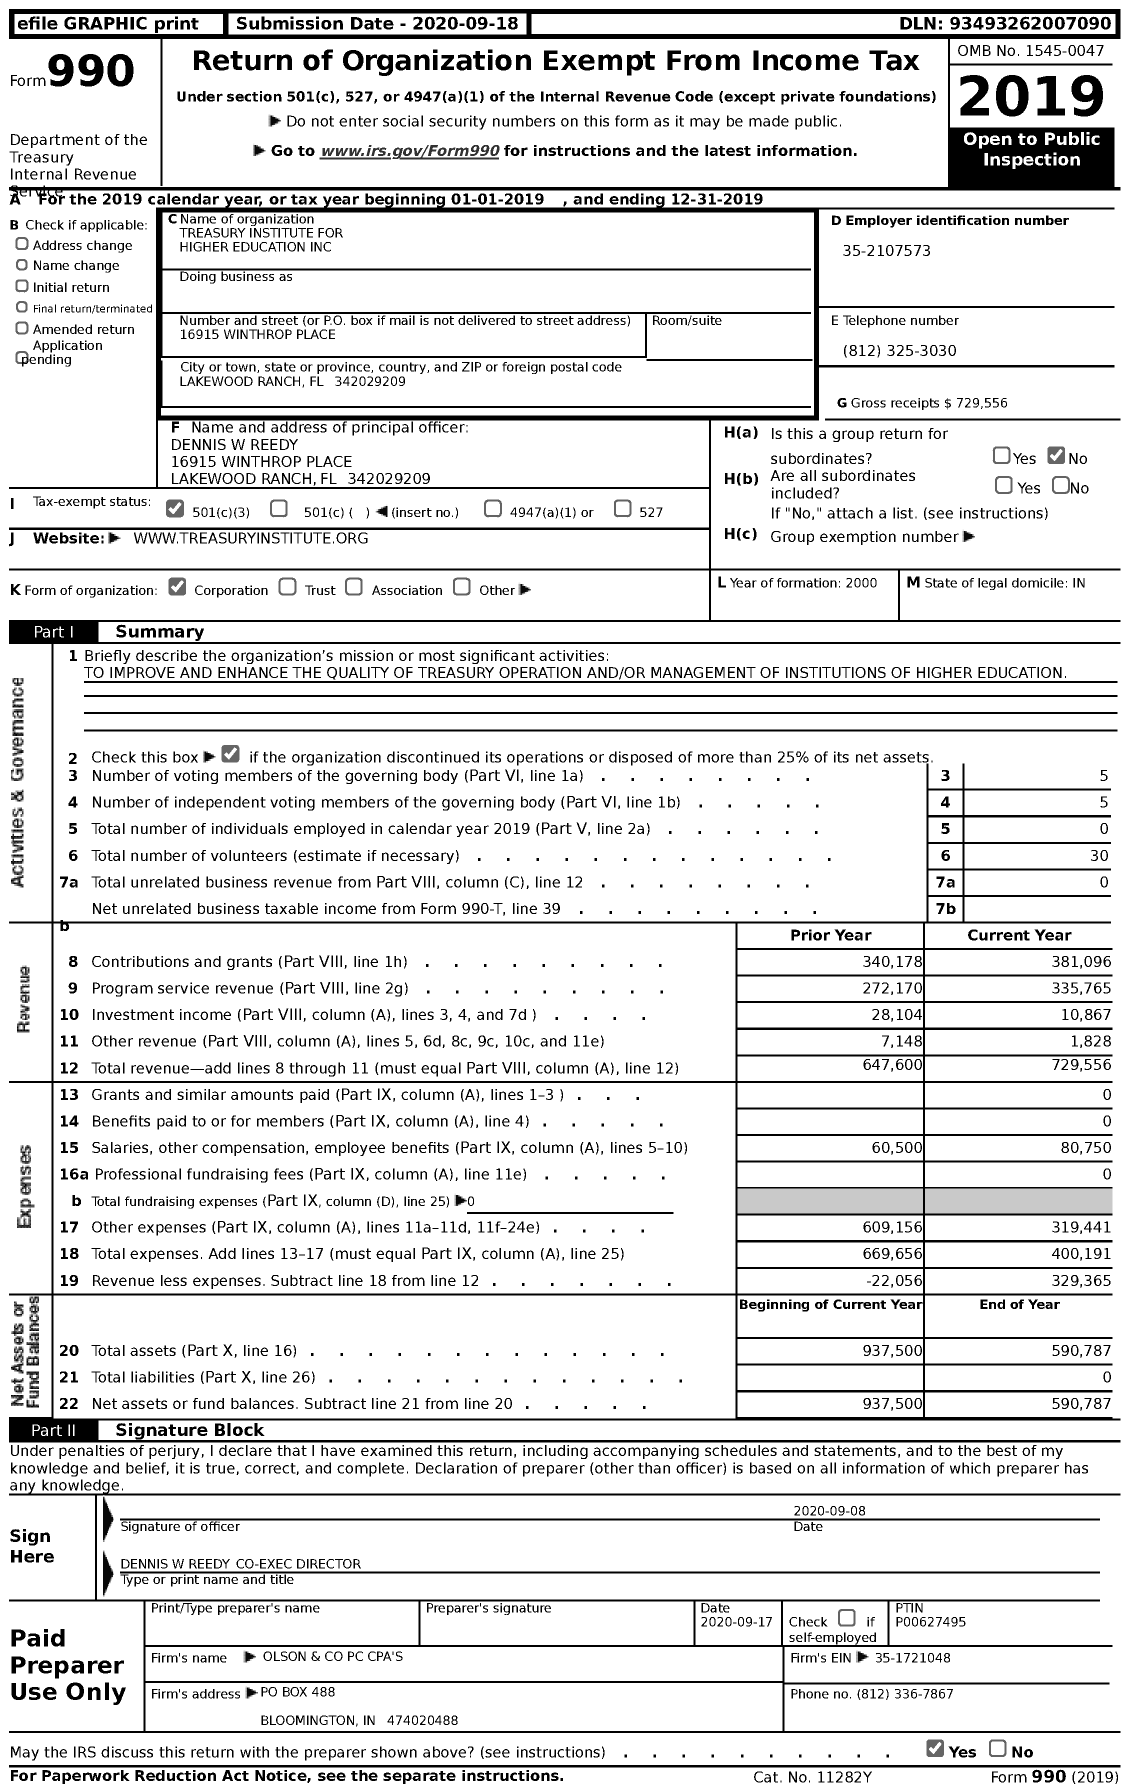 Image of first page of 2019 Form 990 for Treasury Institute for Higher Education